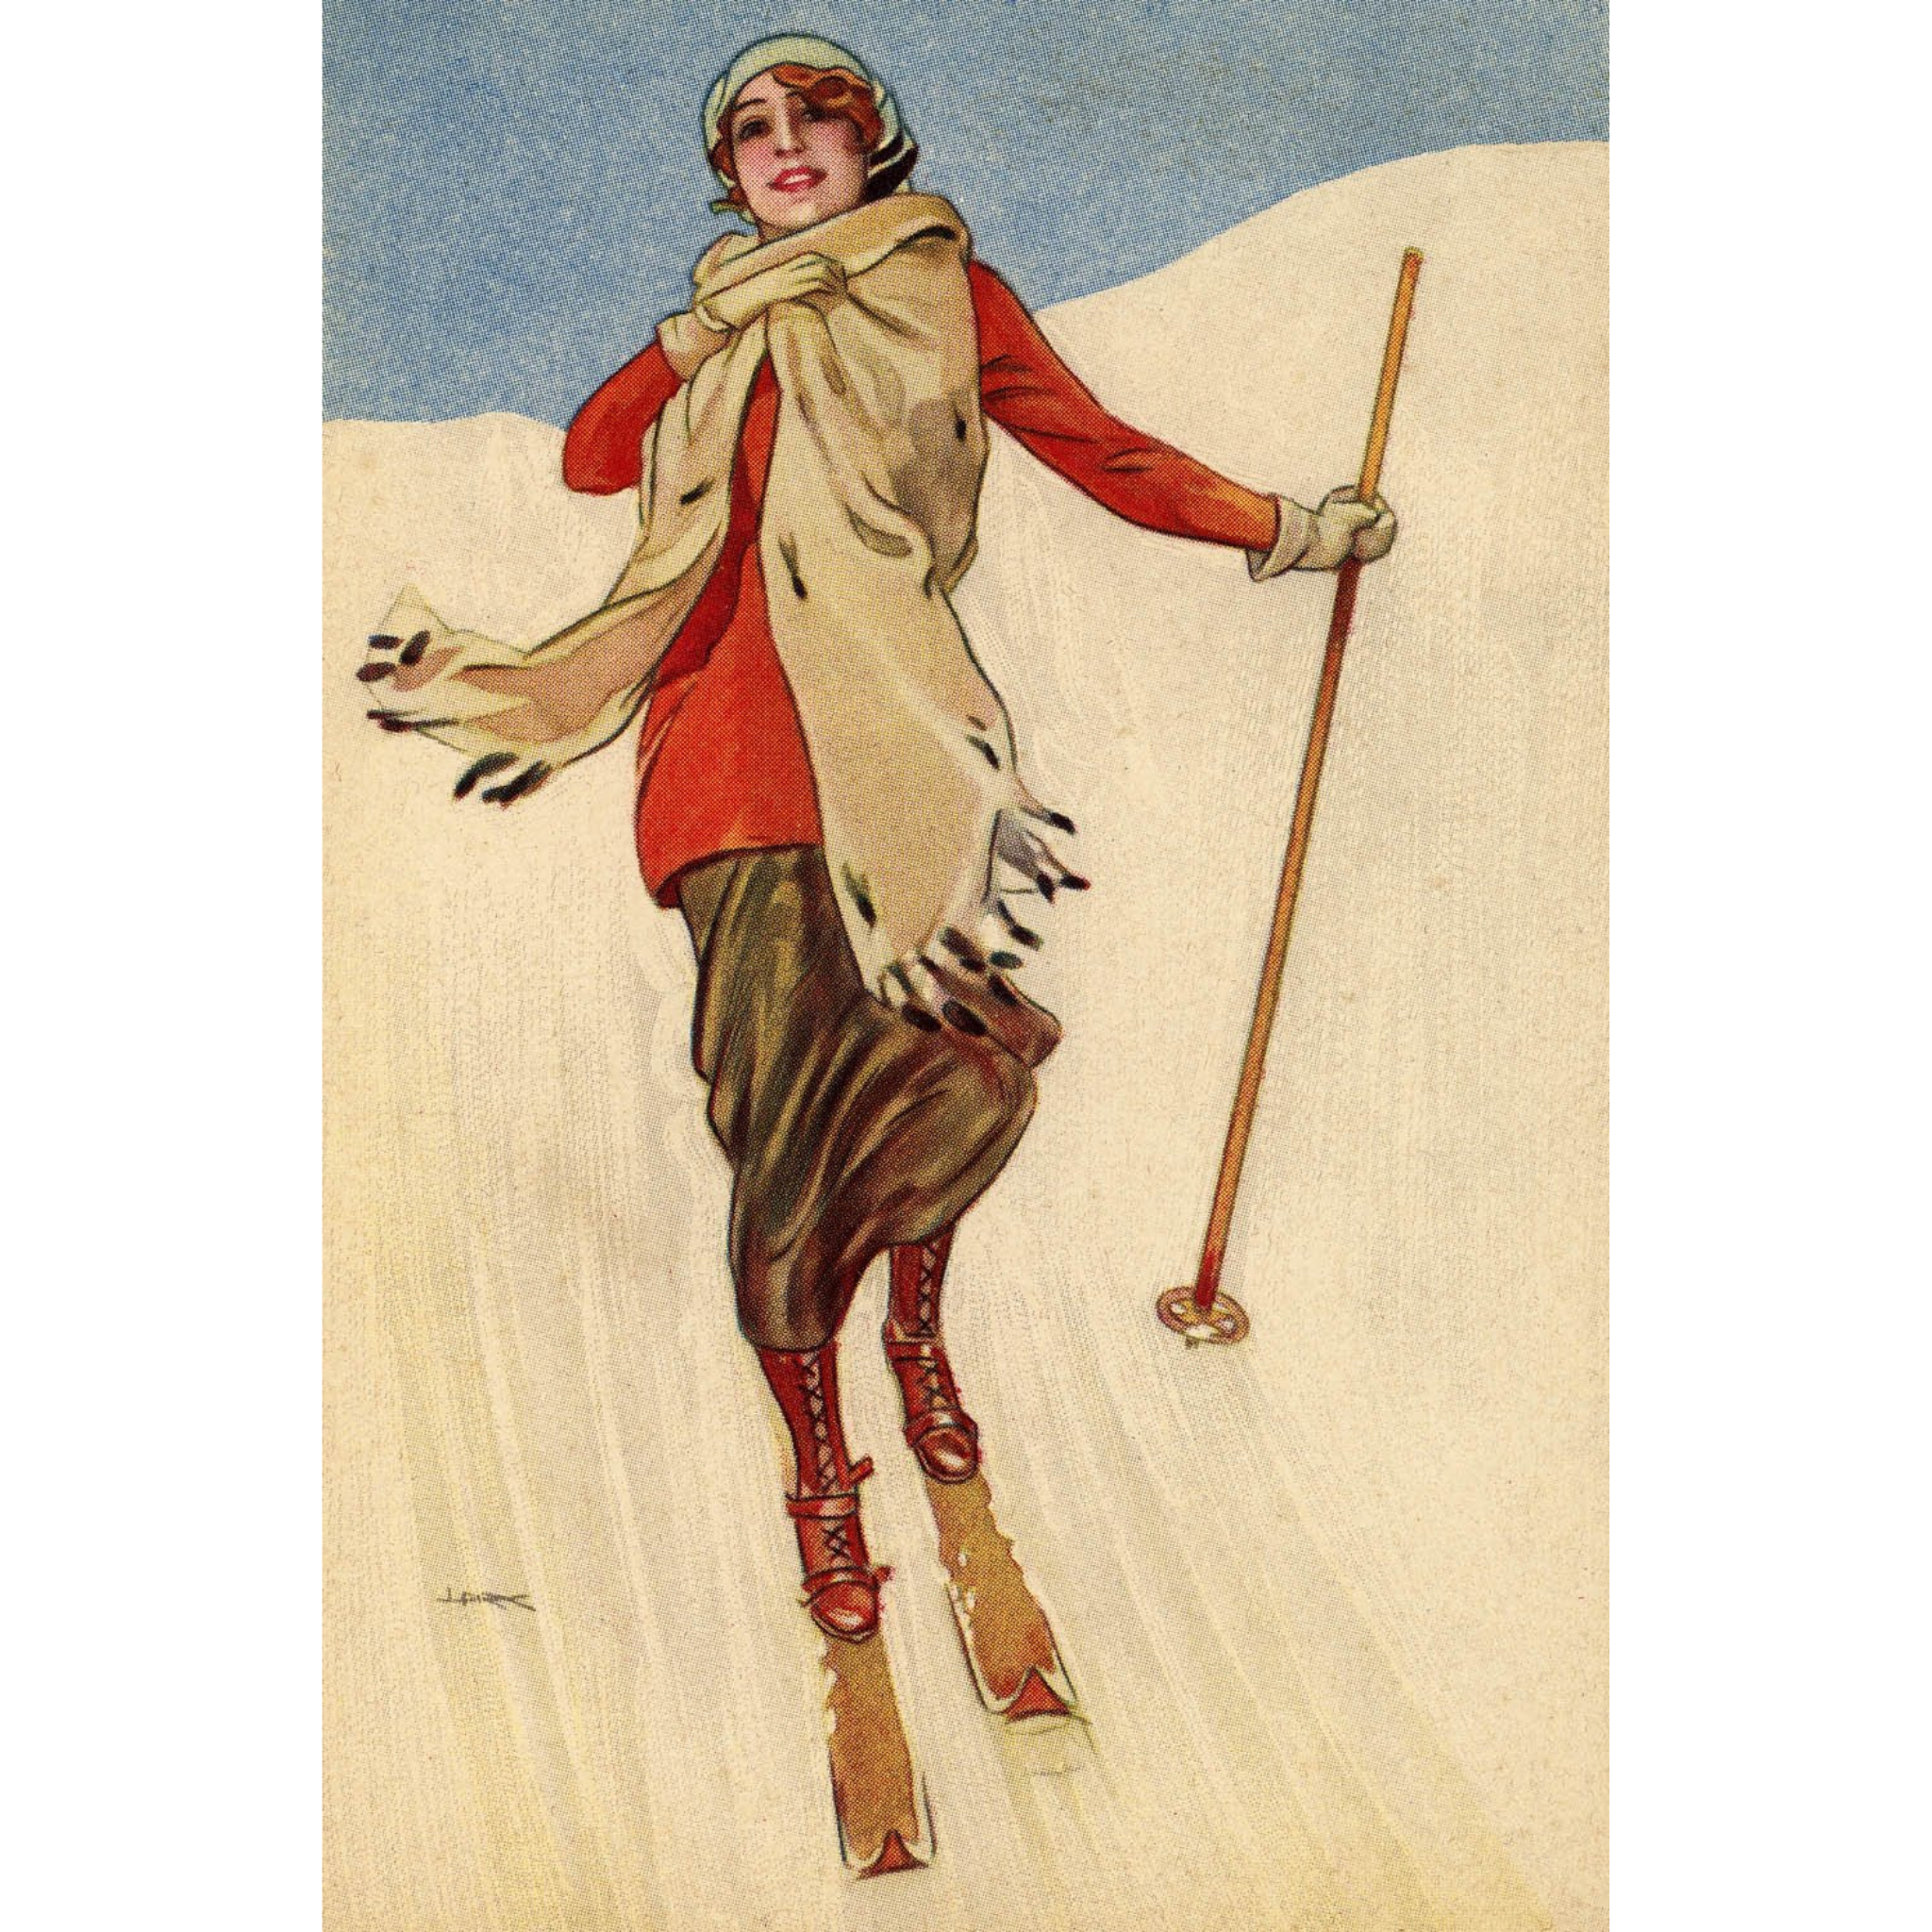 Woman Skiing in Red Sweater with Scarf - ca. 1925 Lithograph